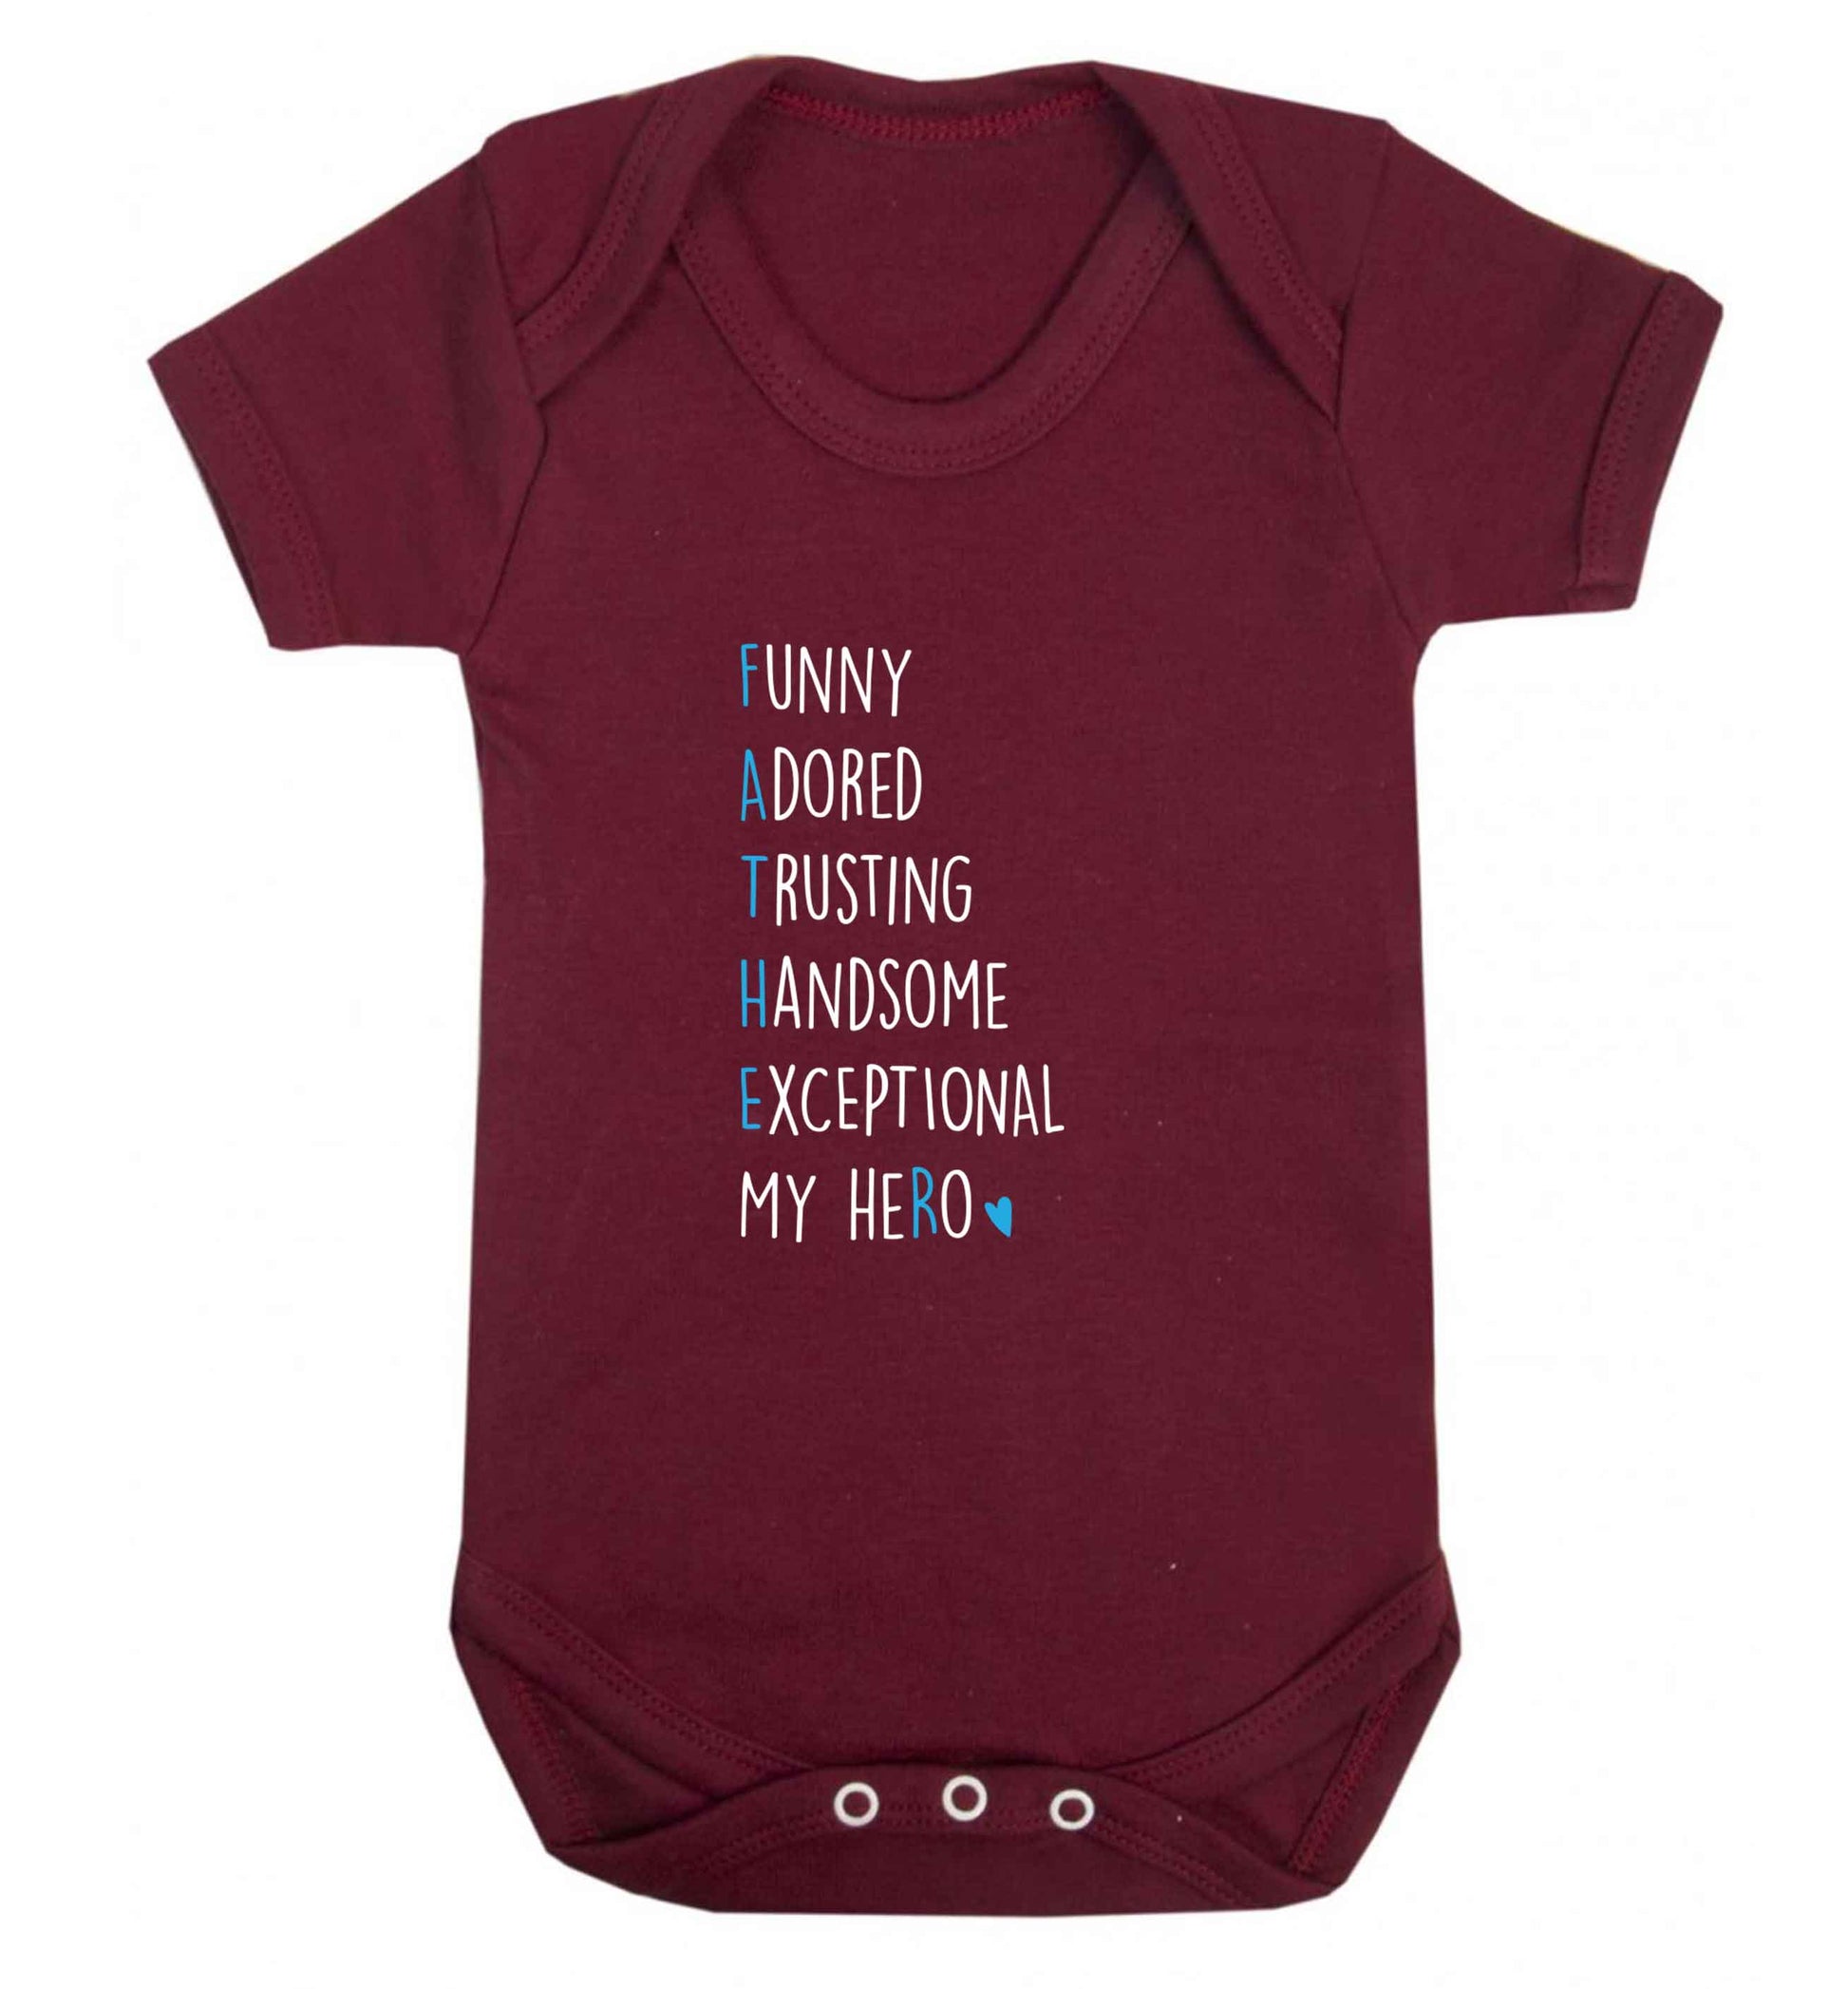 Father, funny adored trusting handsome exceptional my hero baby vest maroon 18-24 months